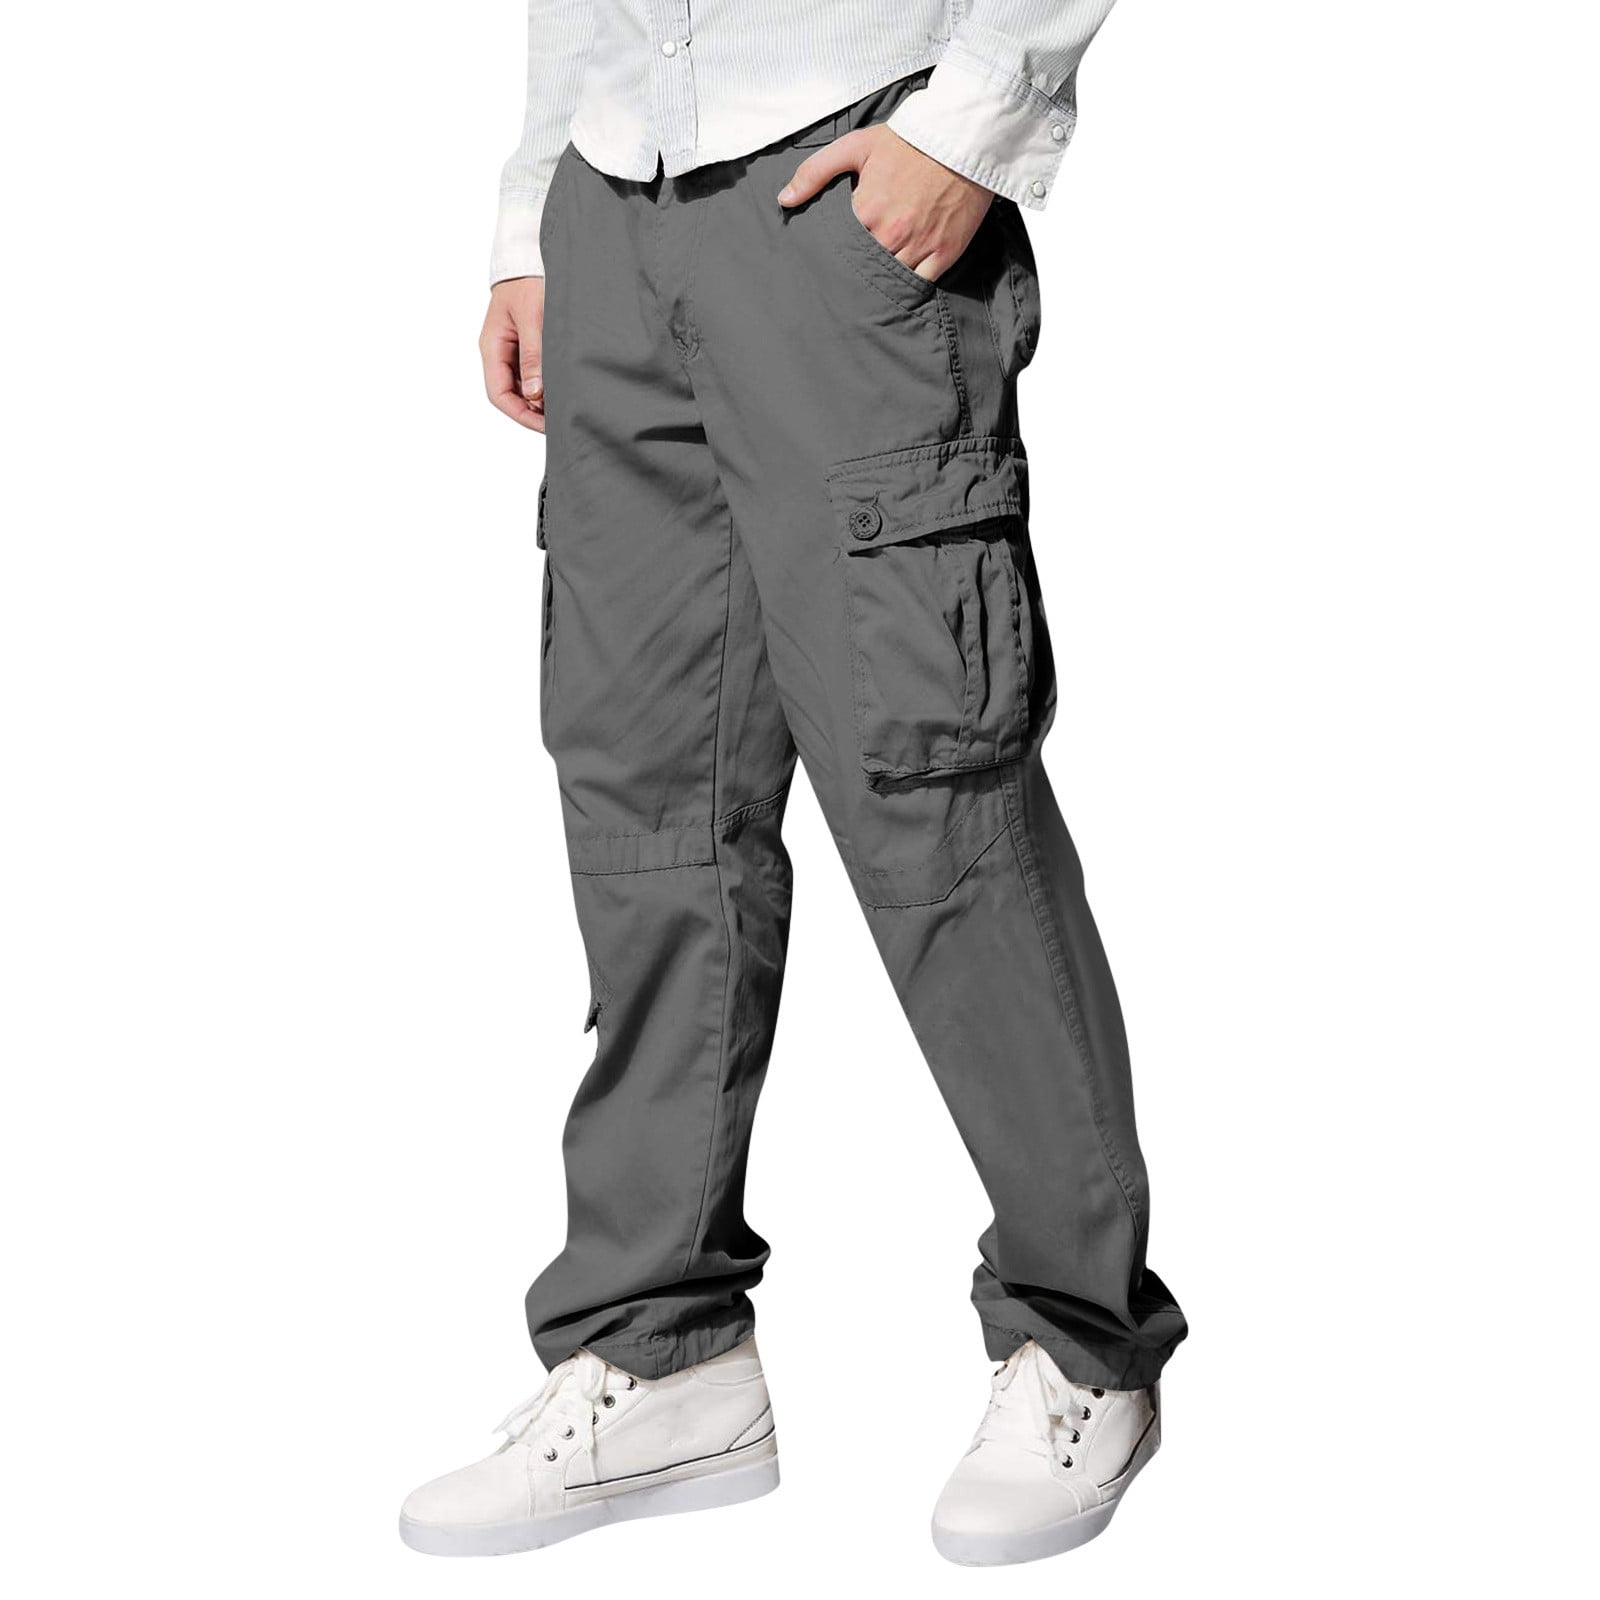 Hanas Men's Straight Workwear Casual Trousers, Solid Color Lightweight  Outdoor Fishing Travel Safari Pants with Pocket 